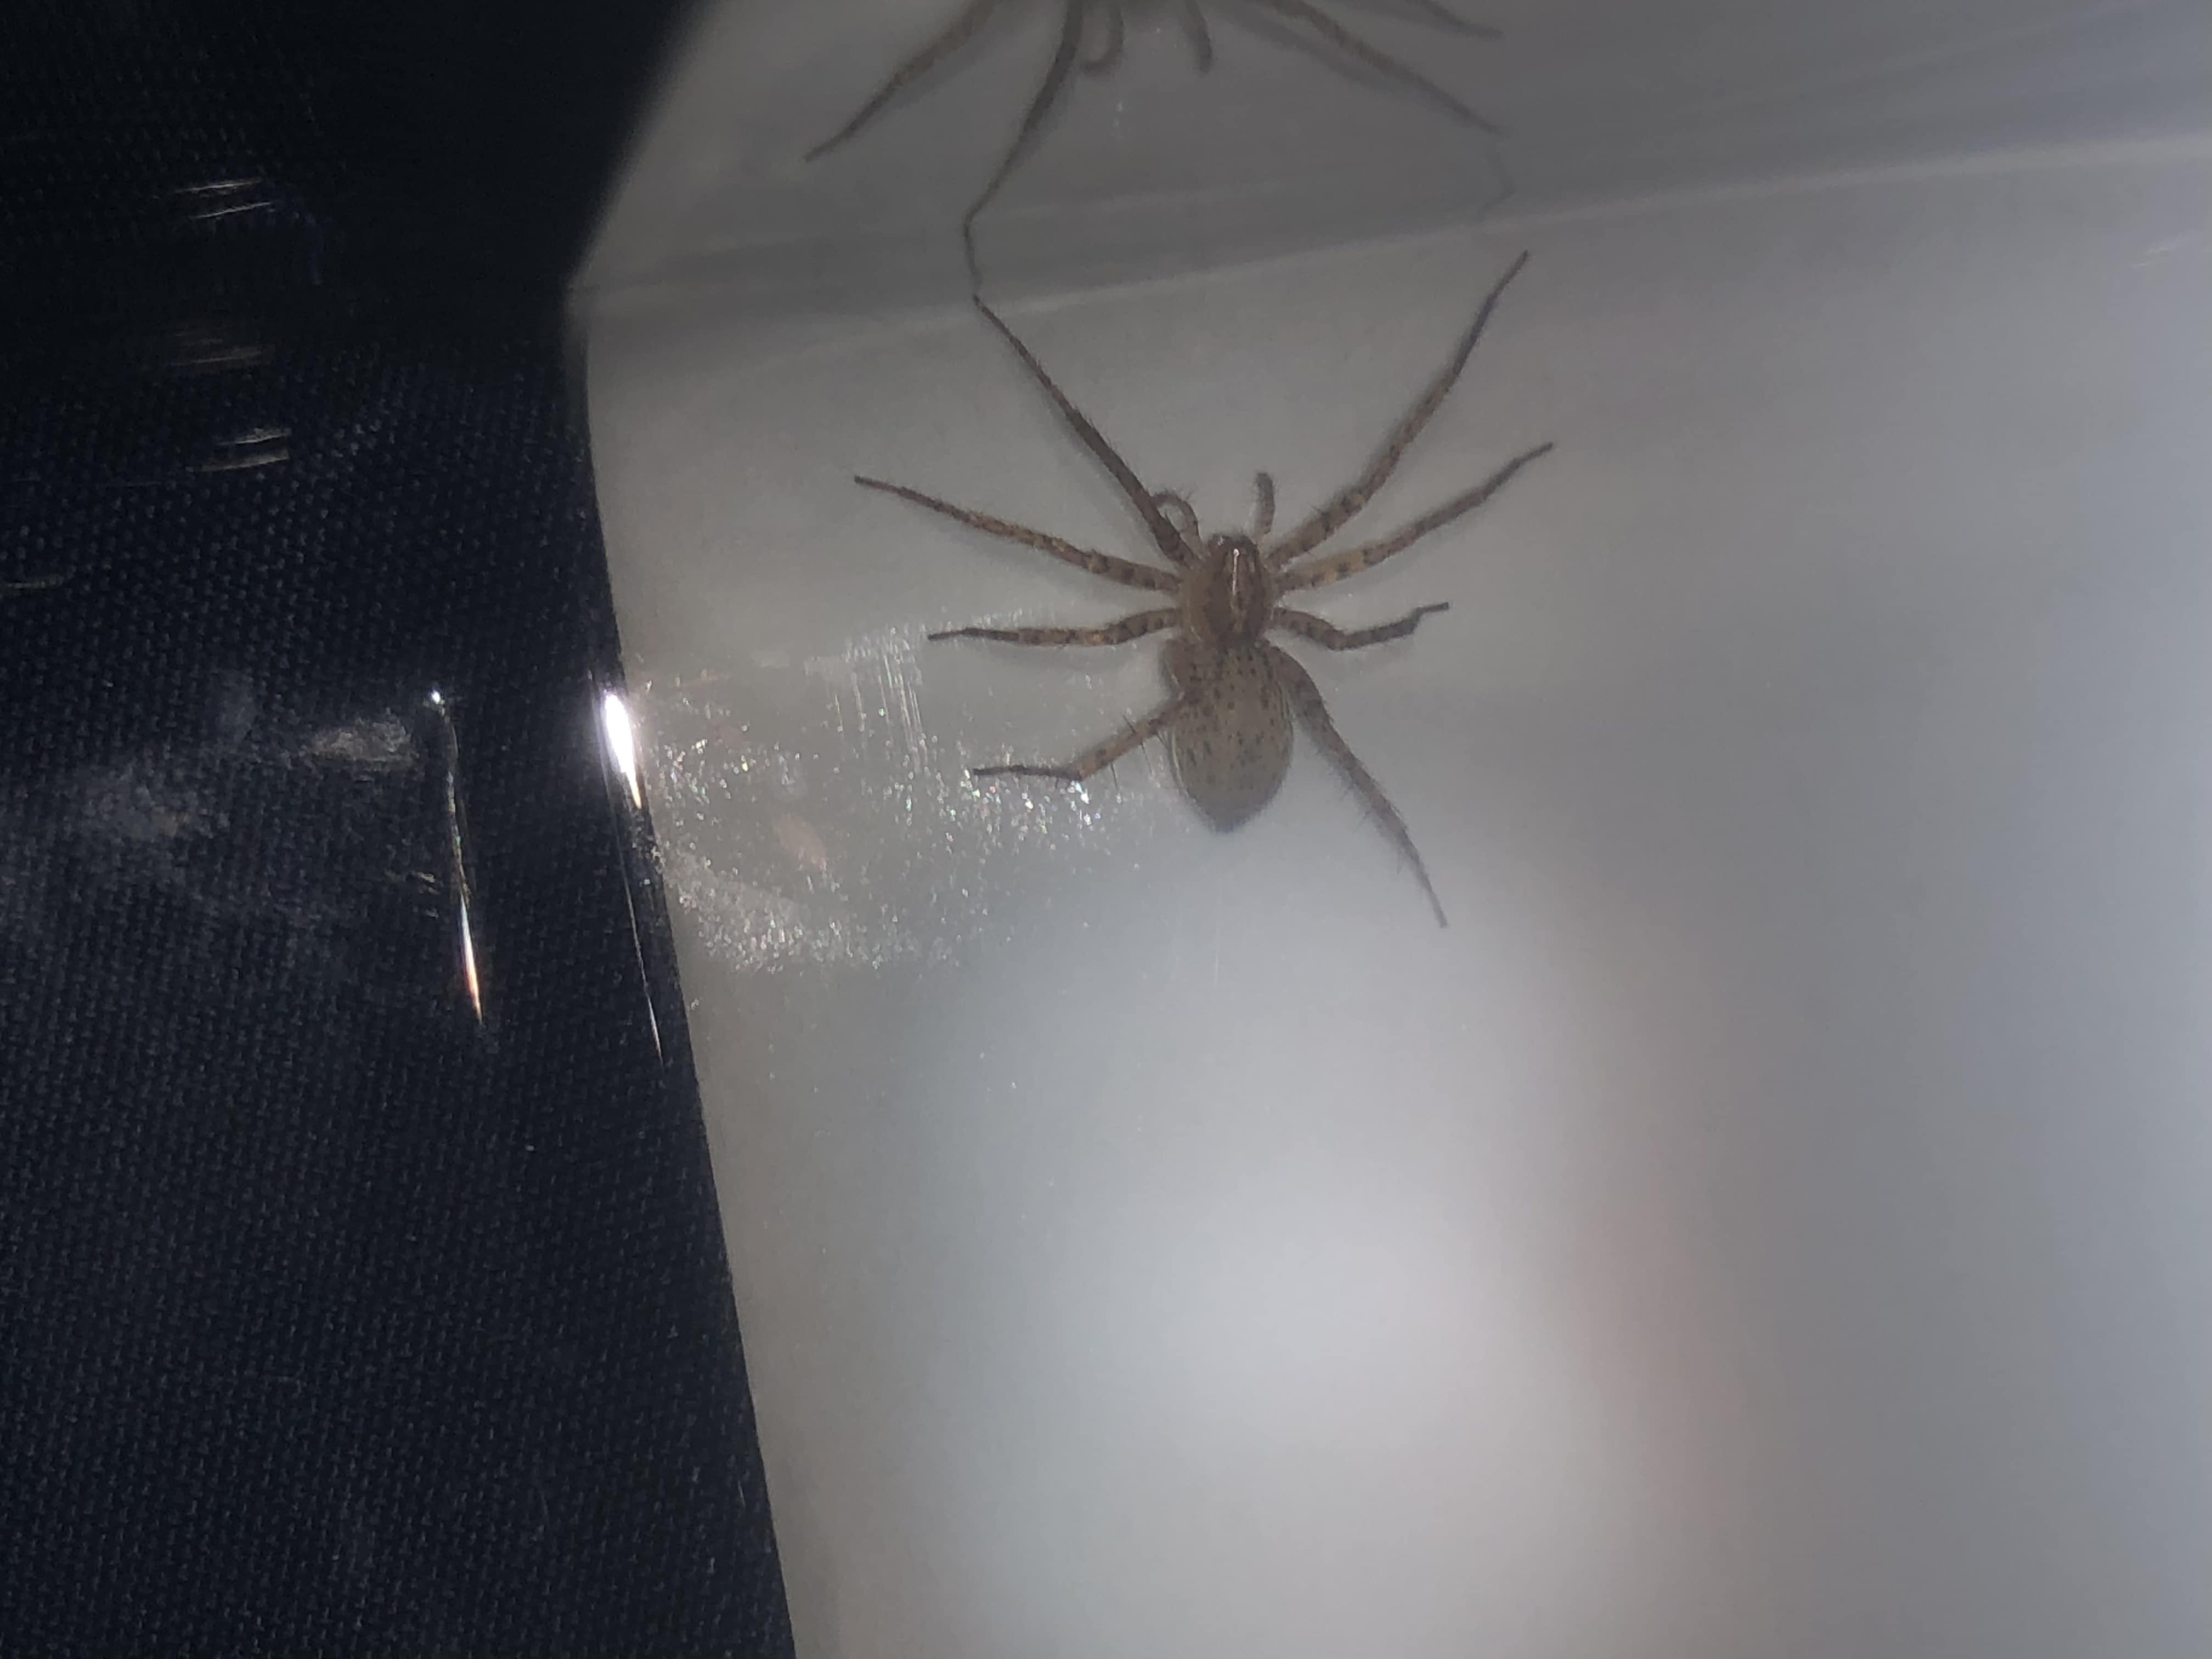 Picture of Anyphaenidae (Ghost Spiders) - Dorsal